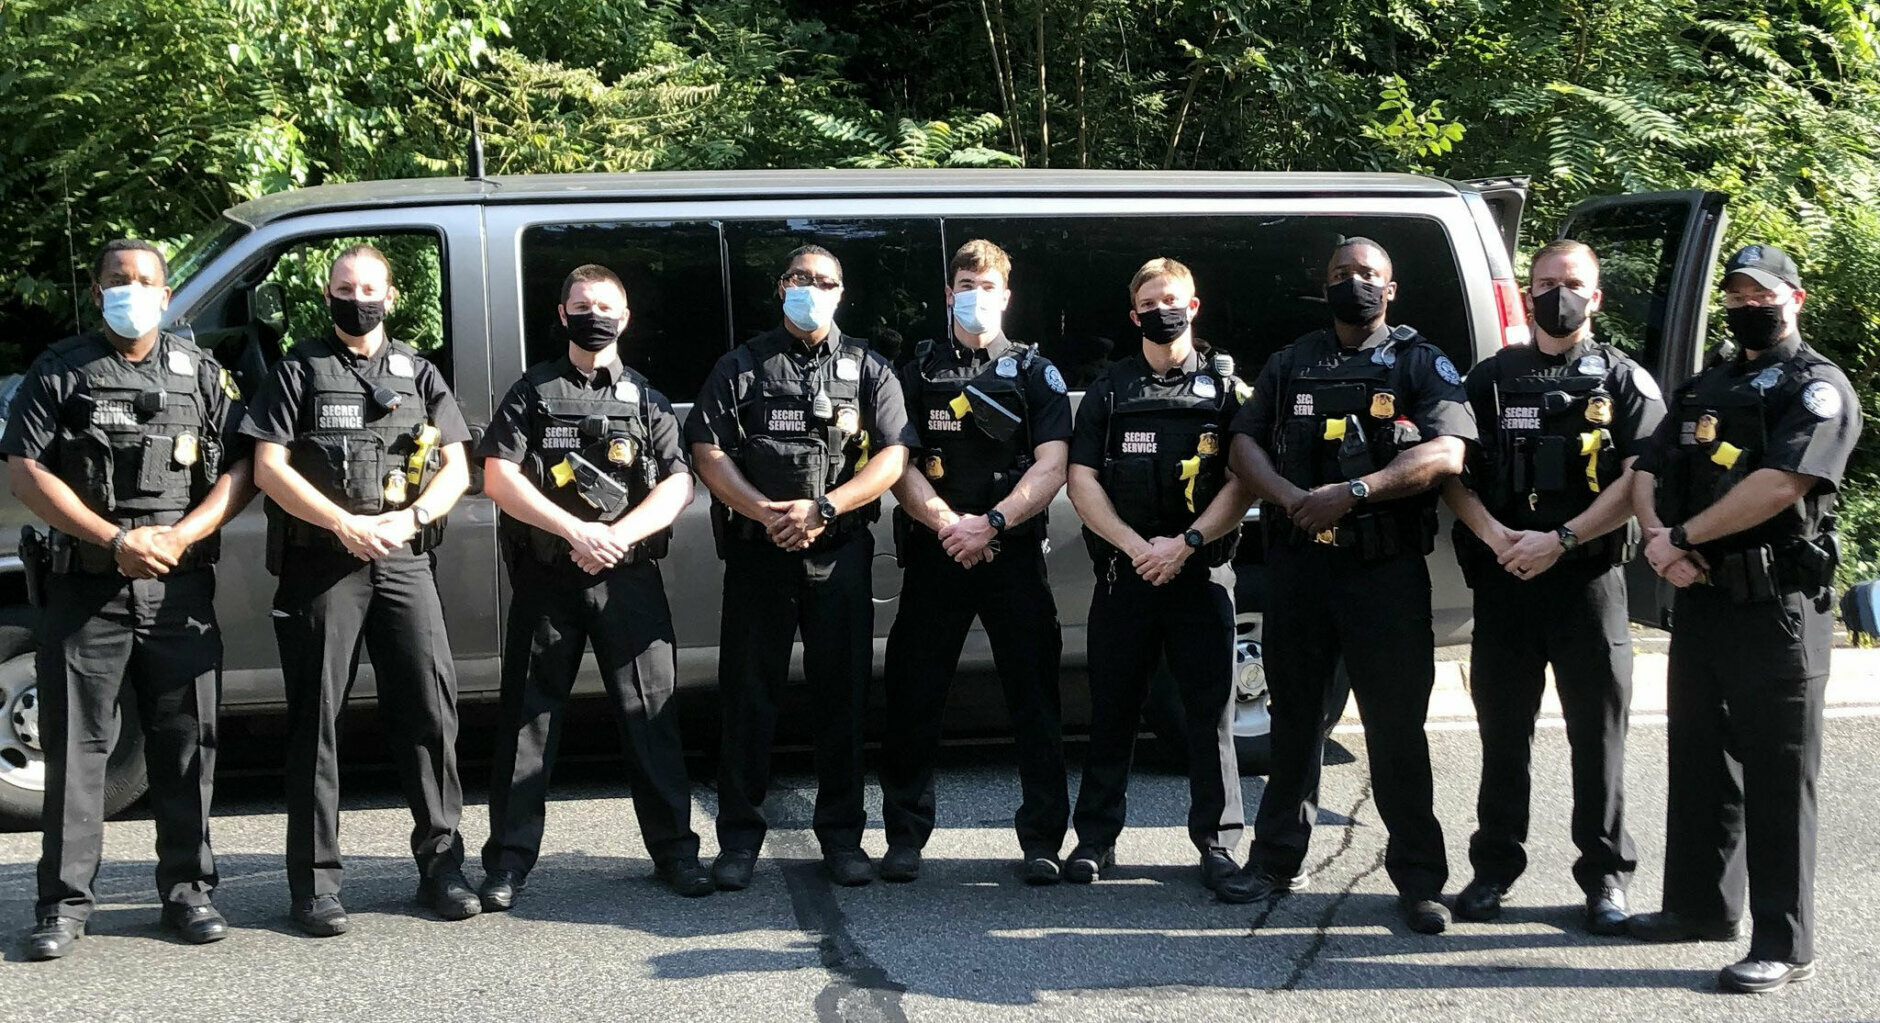 A van carrying Secret Service recruit graduates stopped at the crash site and rendered aid before rescue crews arrived, the fire department said. (Courtesy D.C. Fire and EMS).